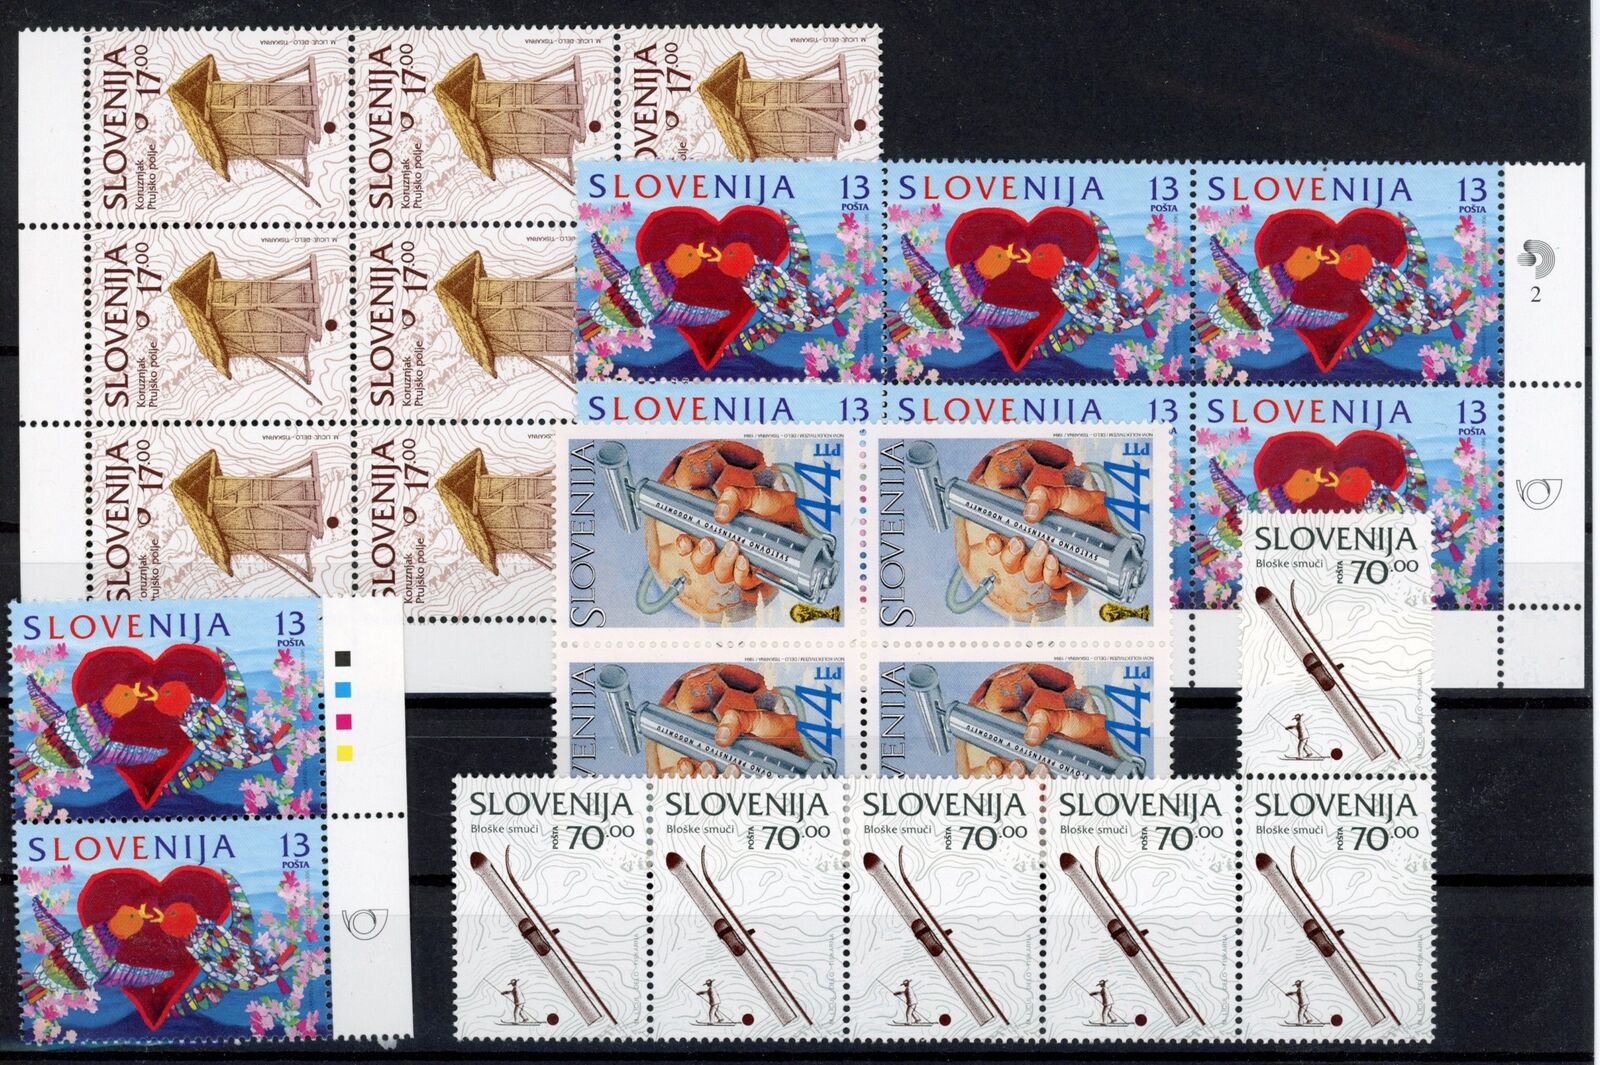 [G95.558] Slovenia good lot very fine MNH stamps